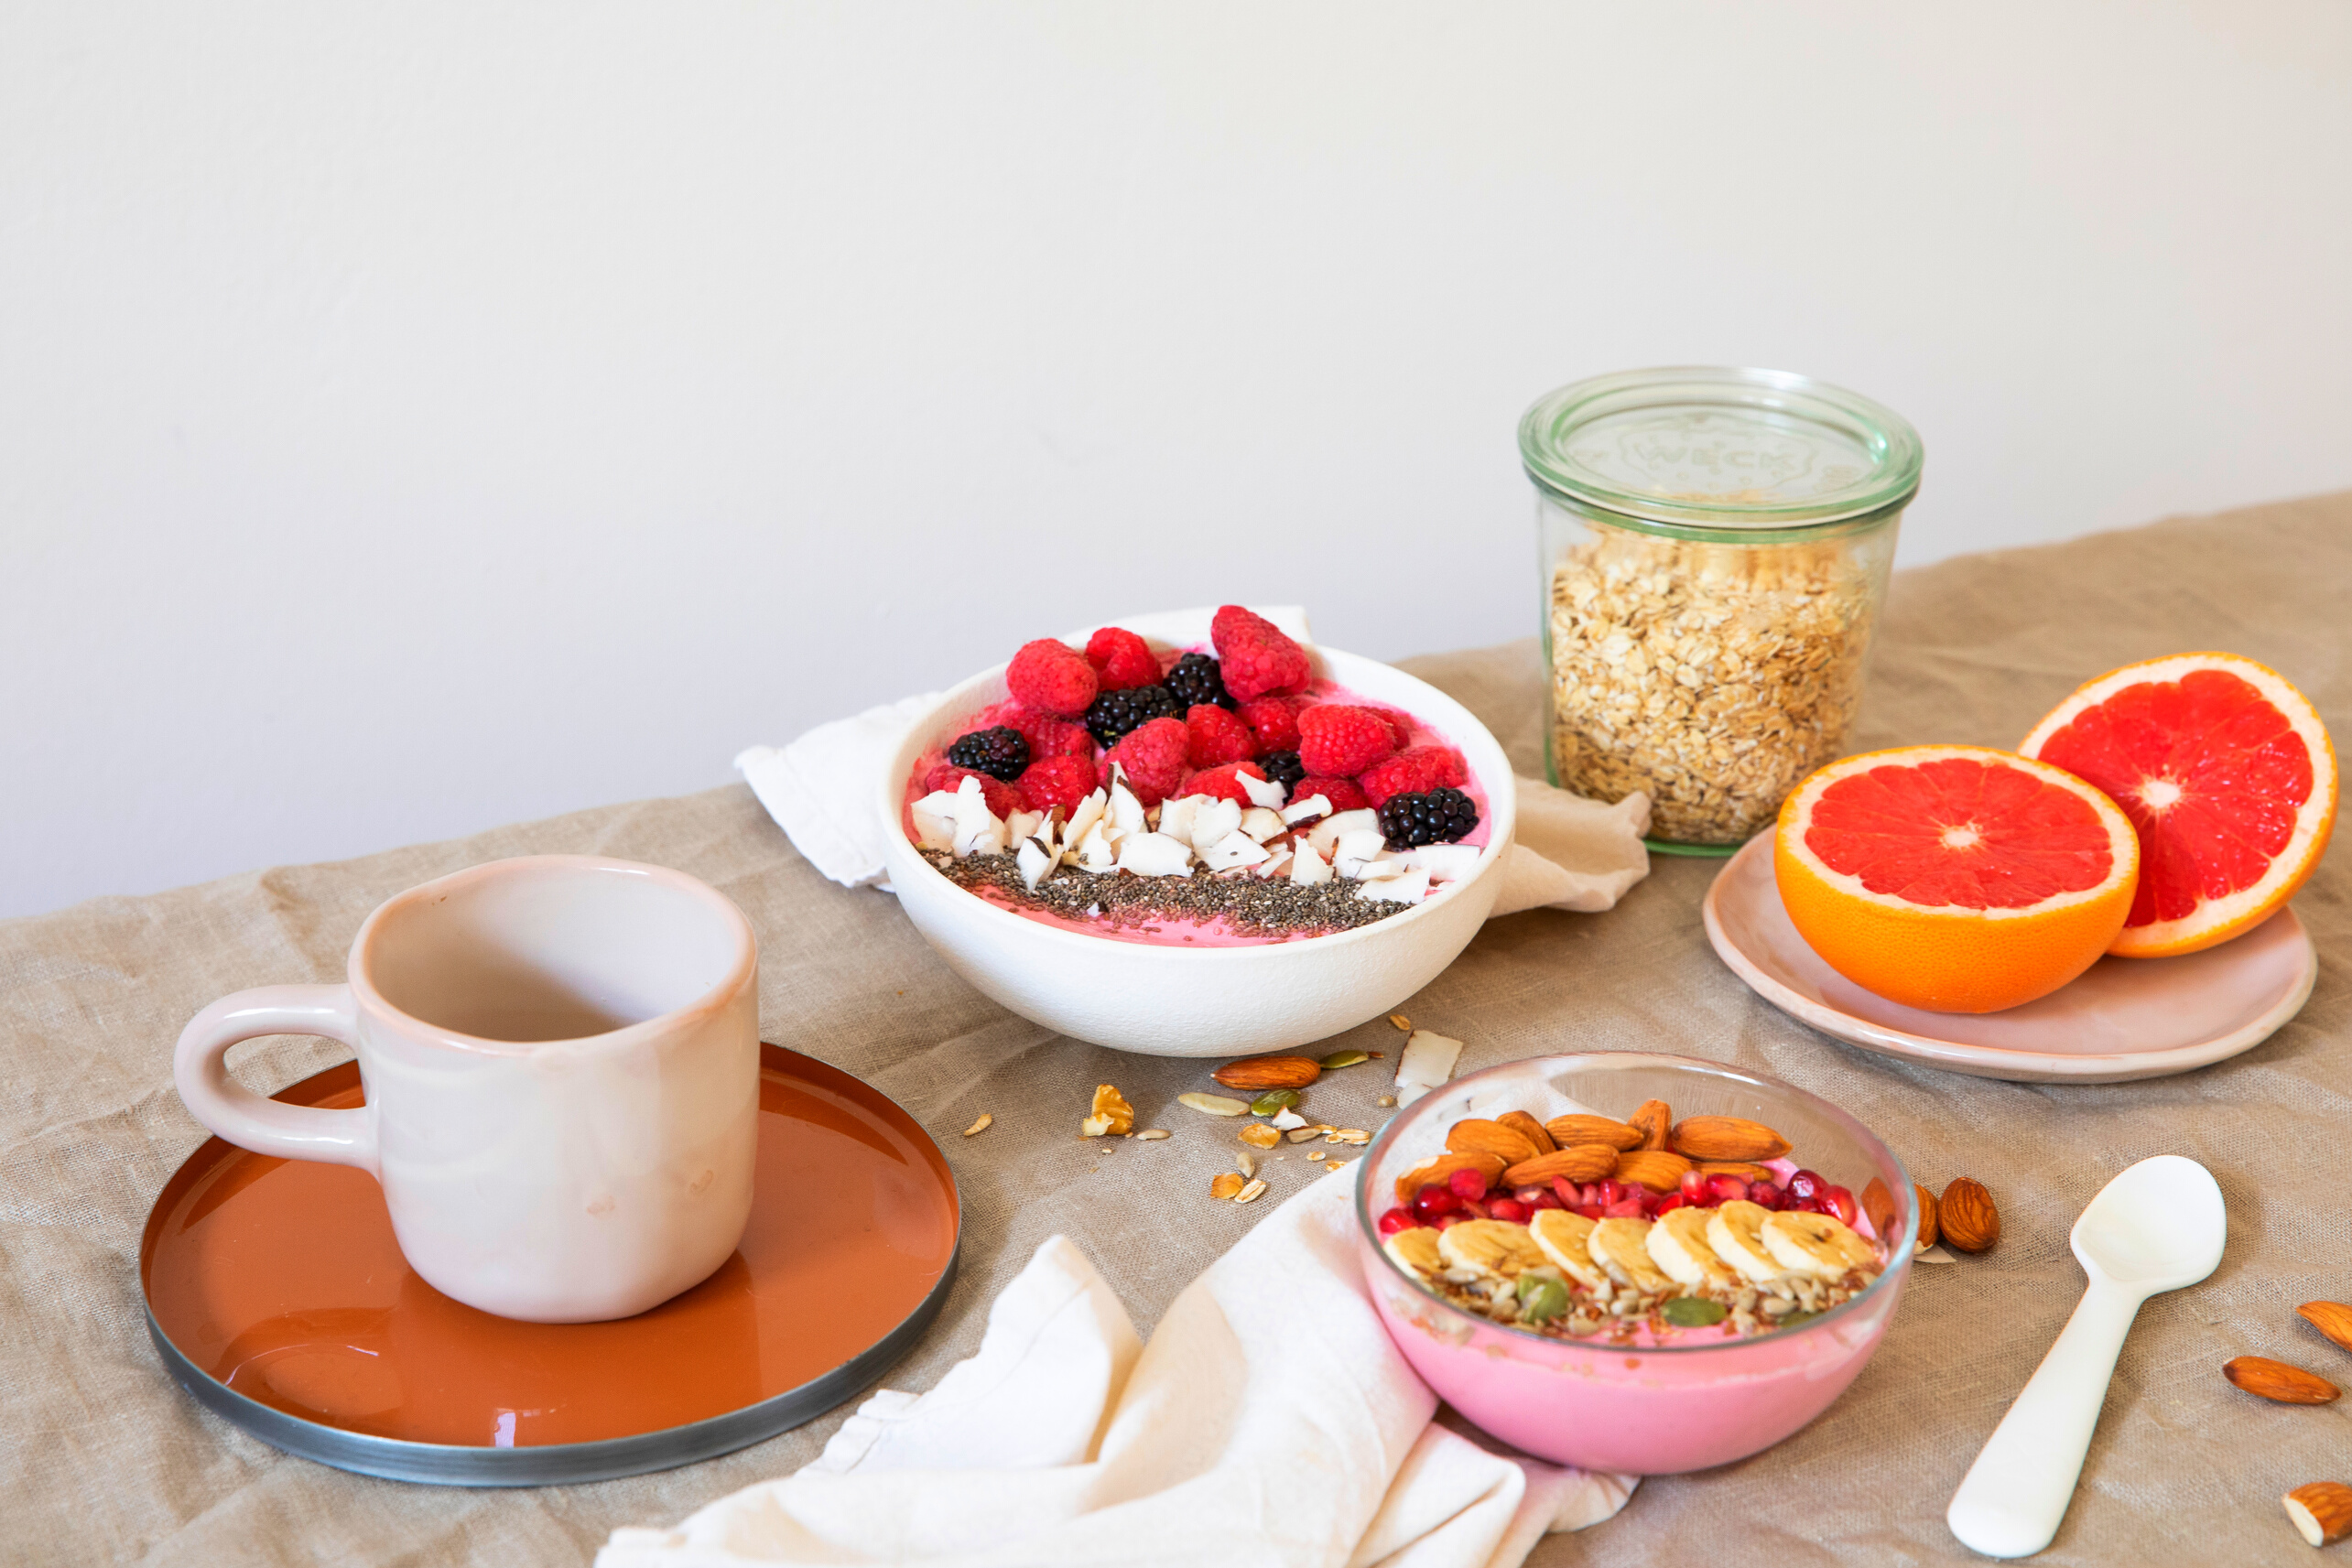 Cup of Drink, Smoothie Bowls, and Fresh Fruits on Table